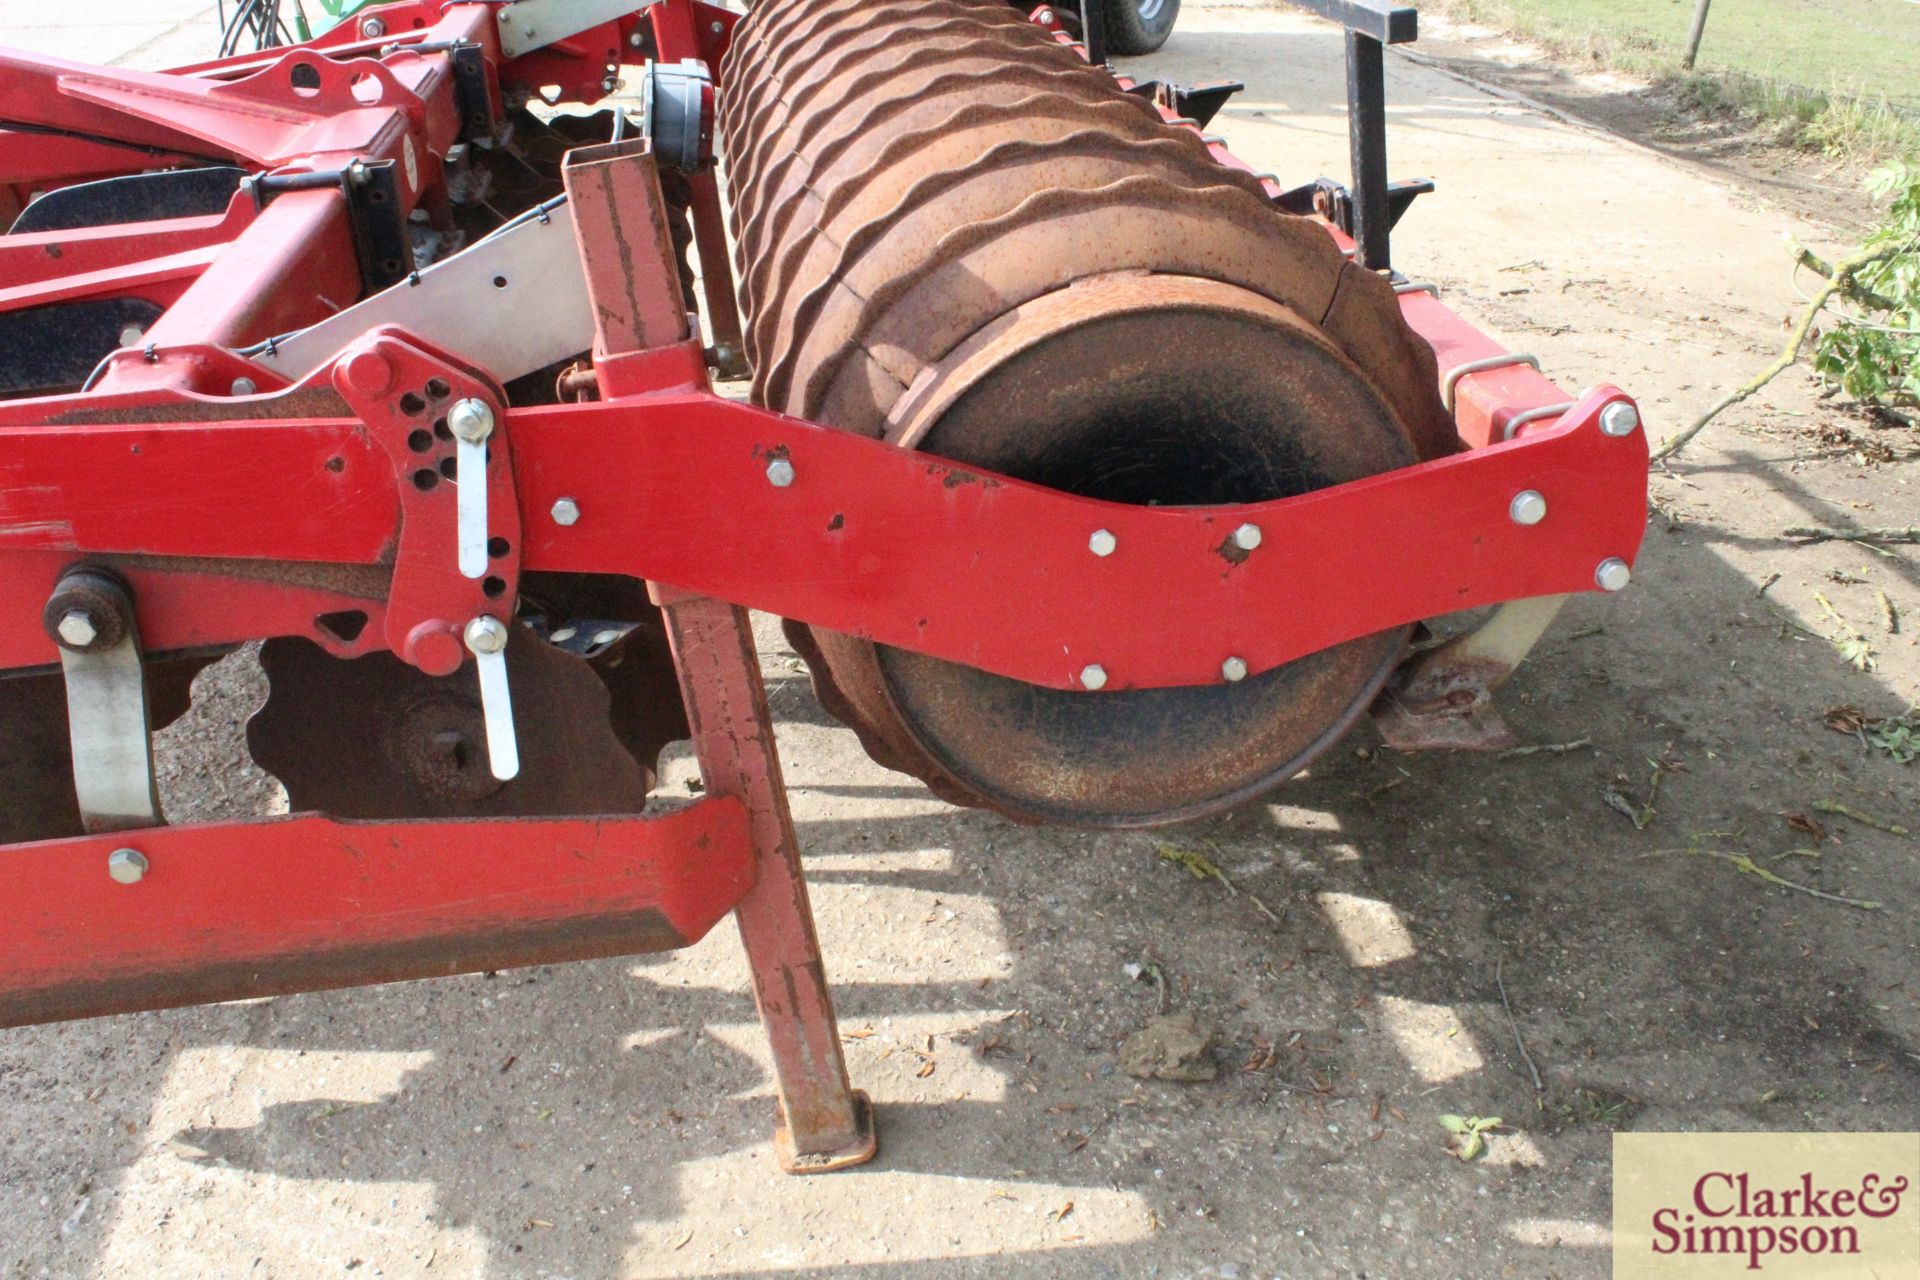 Sumo Trio 3 3m mounted cultivator 2012. Serial number 11626. With six Metcalfe low disturbance legs, - Image 11 of 21